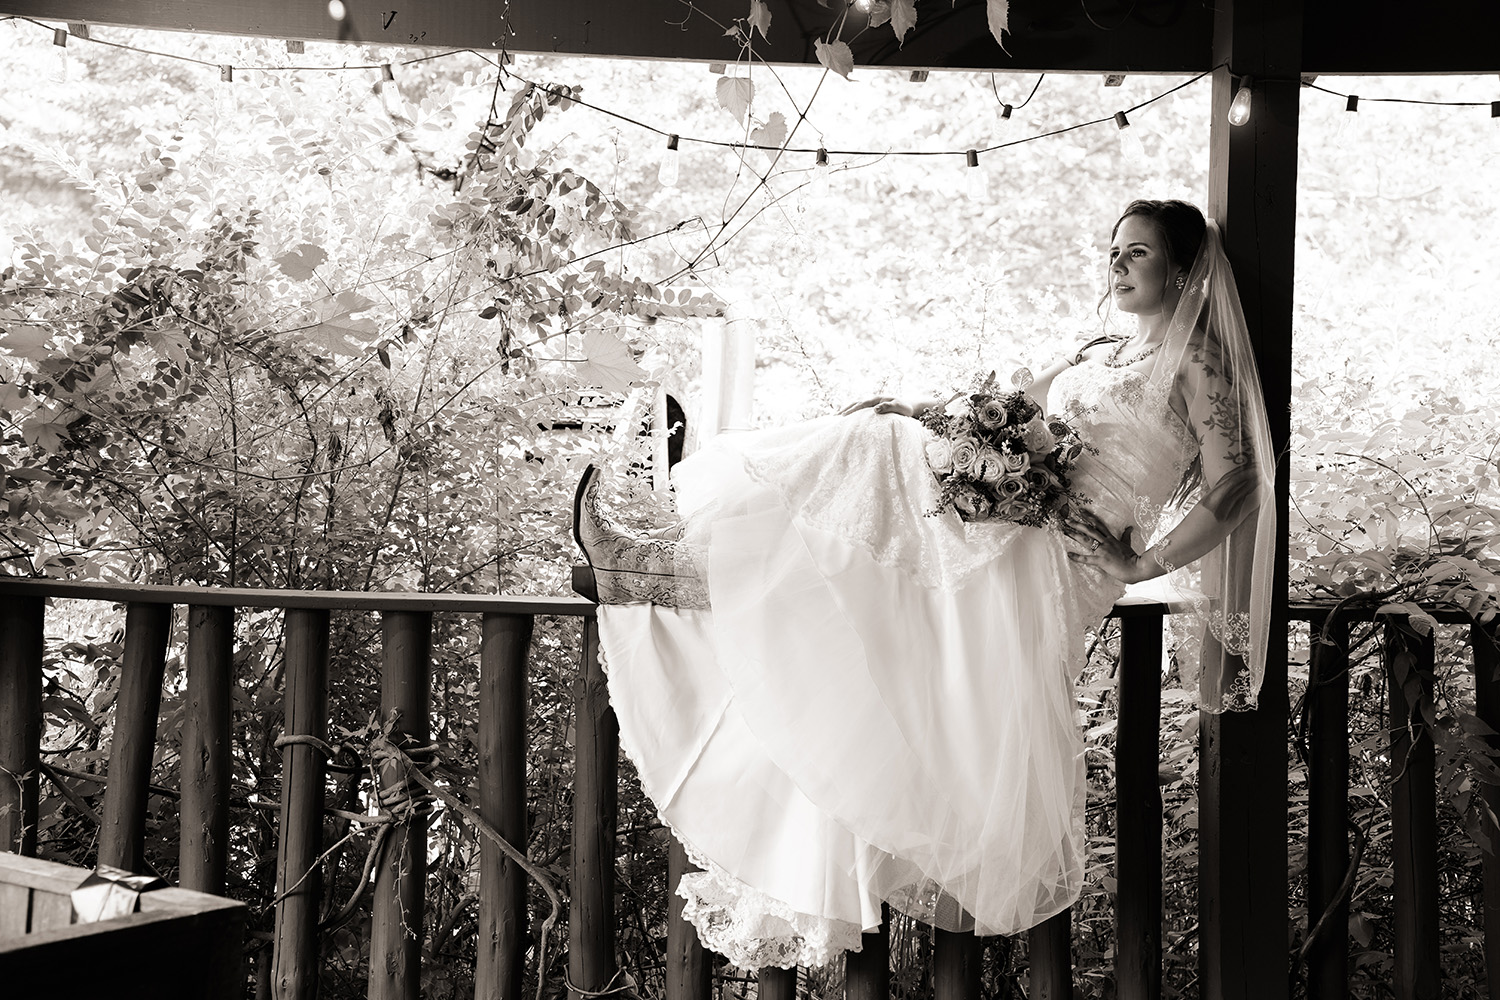 Black and white portrait of a bride sitting on a railing ledge